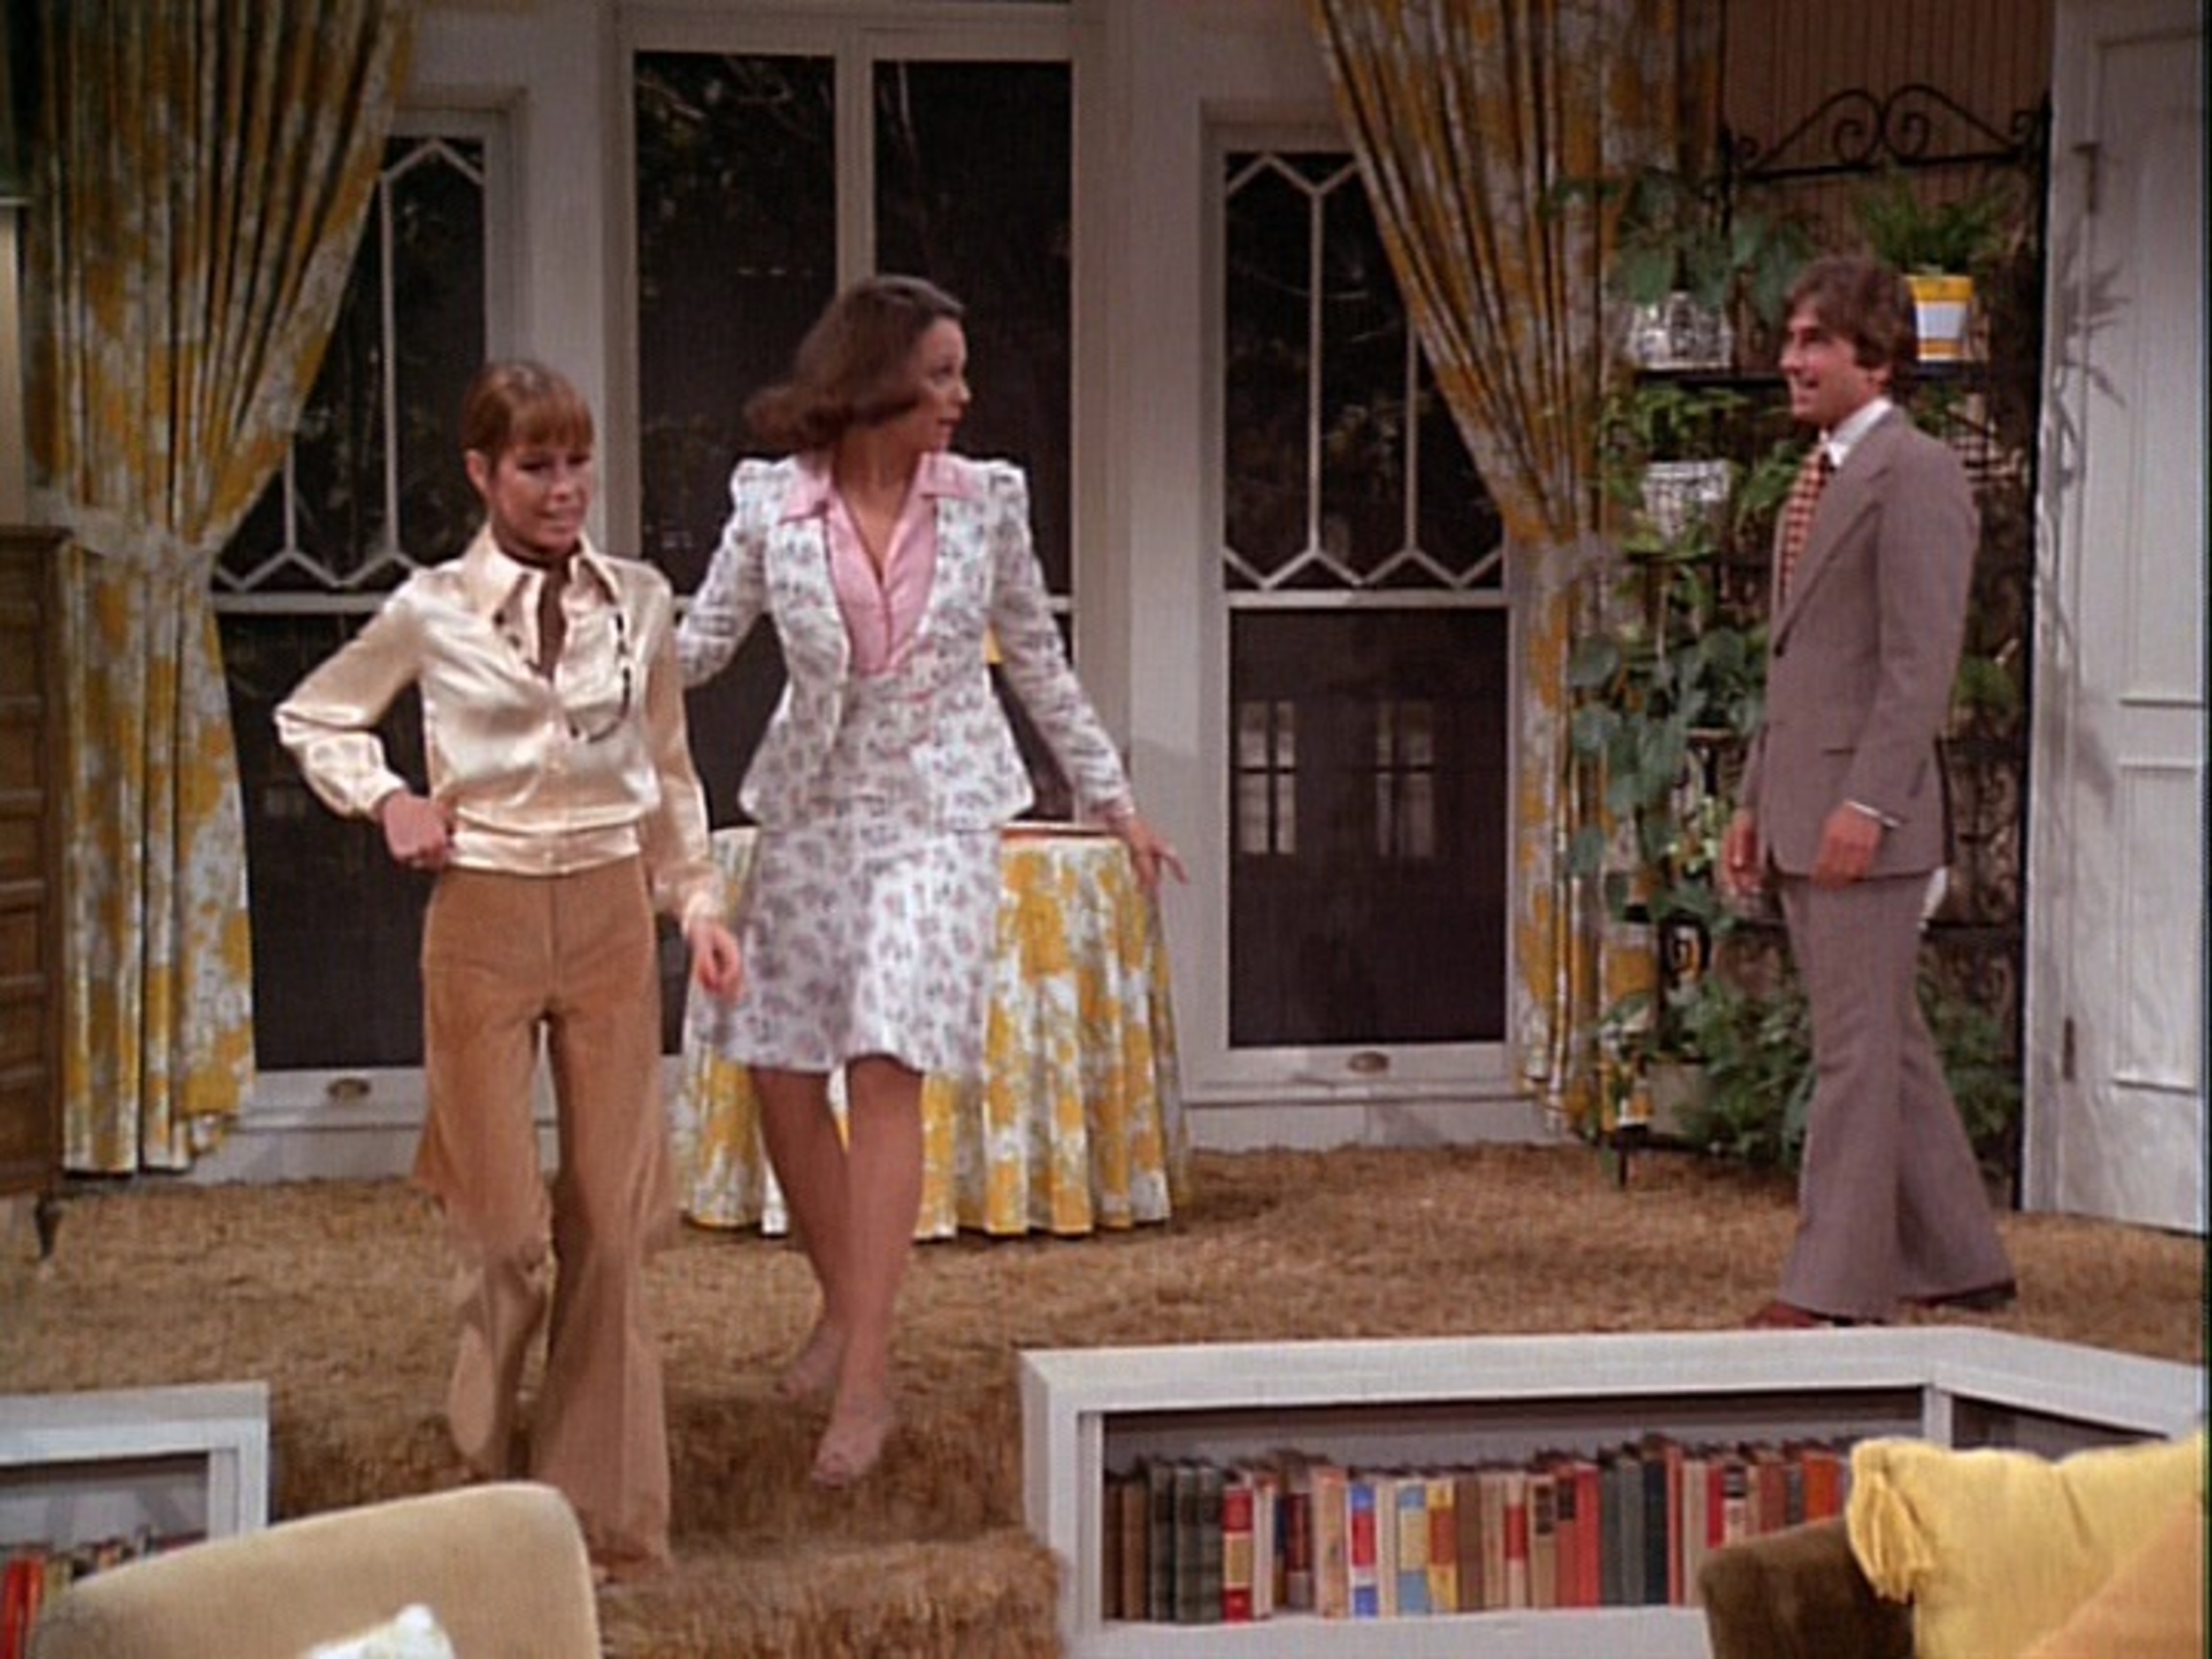 <p>It’s a running gag in “The Mary Tyler Moore Show” that Mary is bad at throwing parties. She tries her best to flip her luck here because a congresswoman is coming over for dinner. Even with the help of Sue Ellen, though, Mary’s party heads toward disaster. We also get a notable appearance from a young Henry Winkler, a few years away from playing The Fonz.</p>